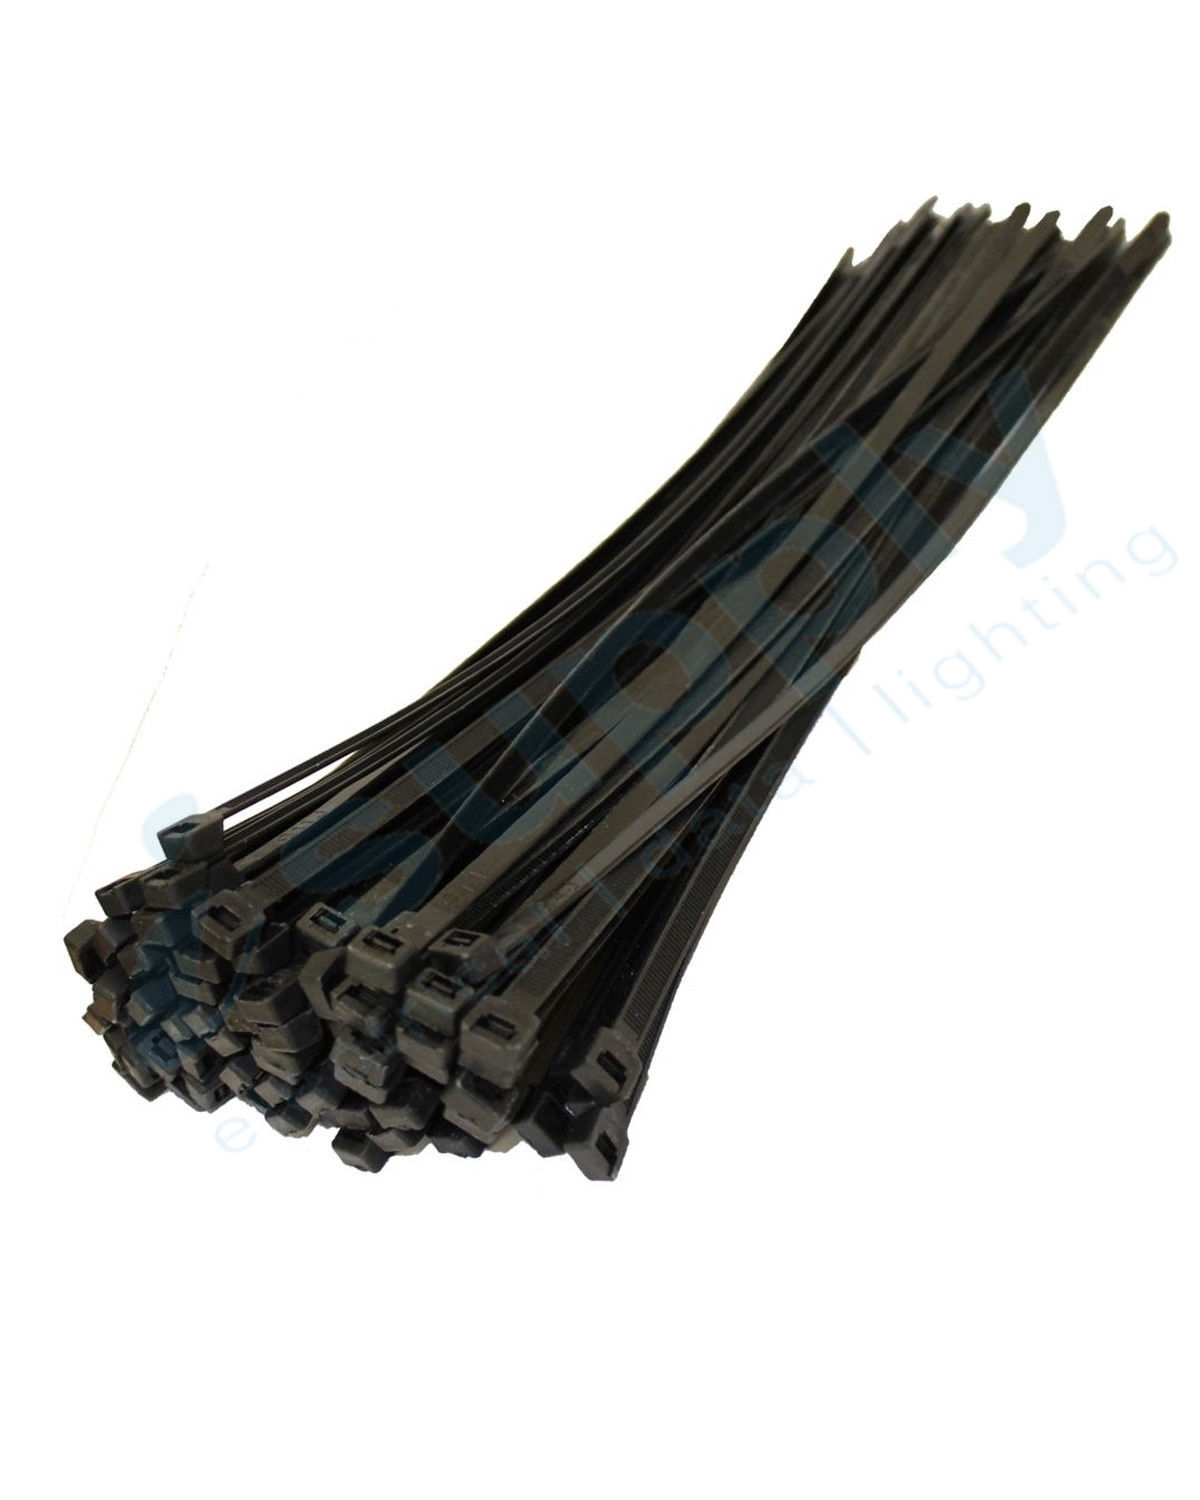 200 Black cable zip ties 300mm x 4.8mm 2 x packets of 100 